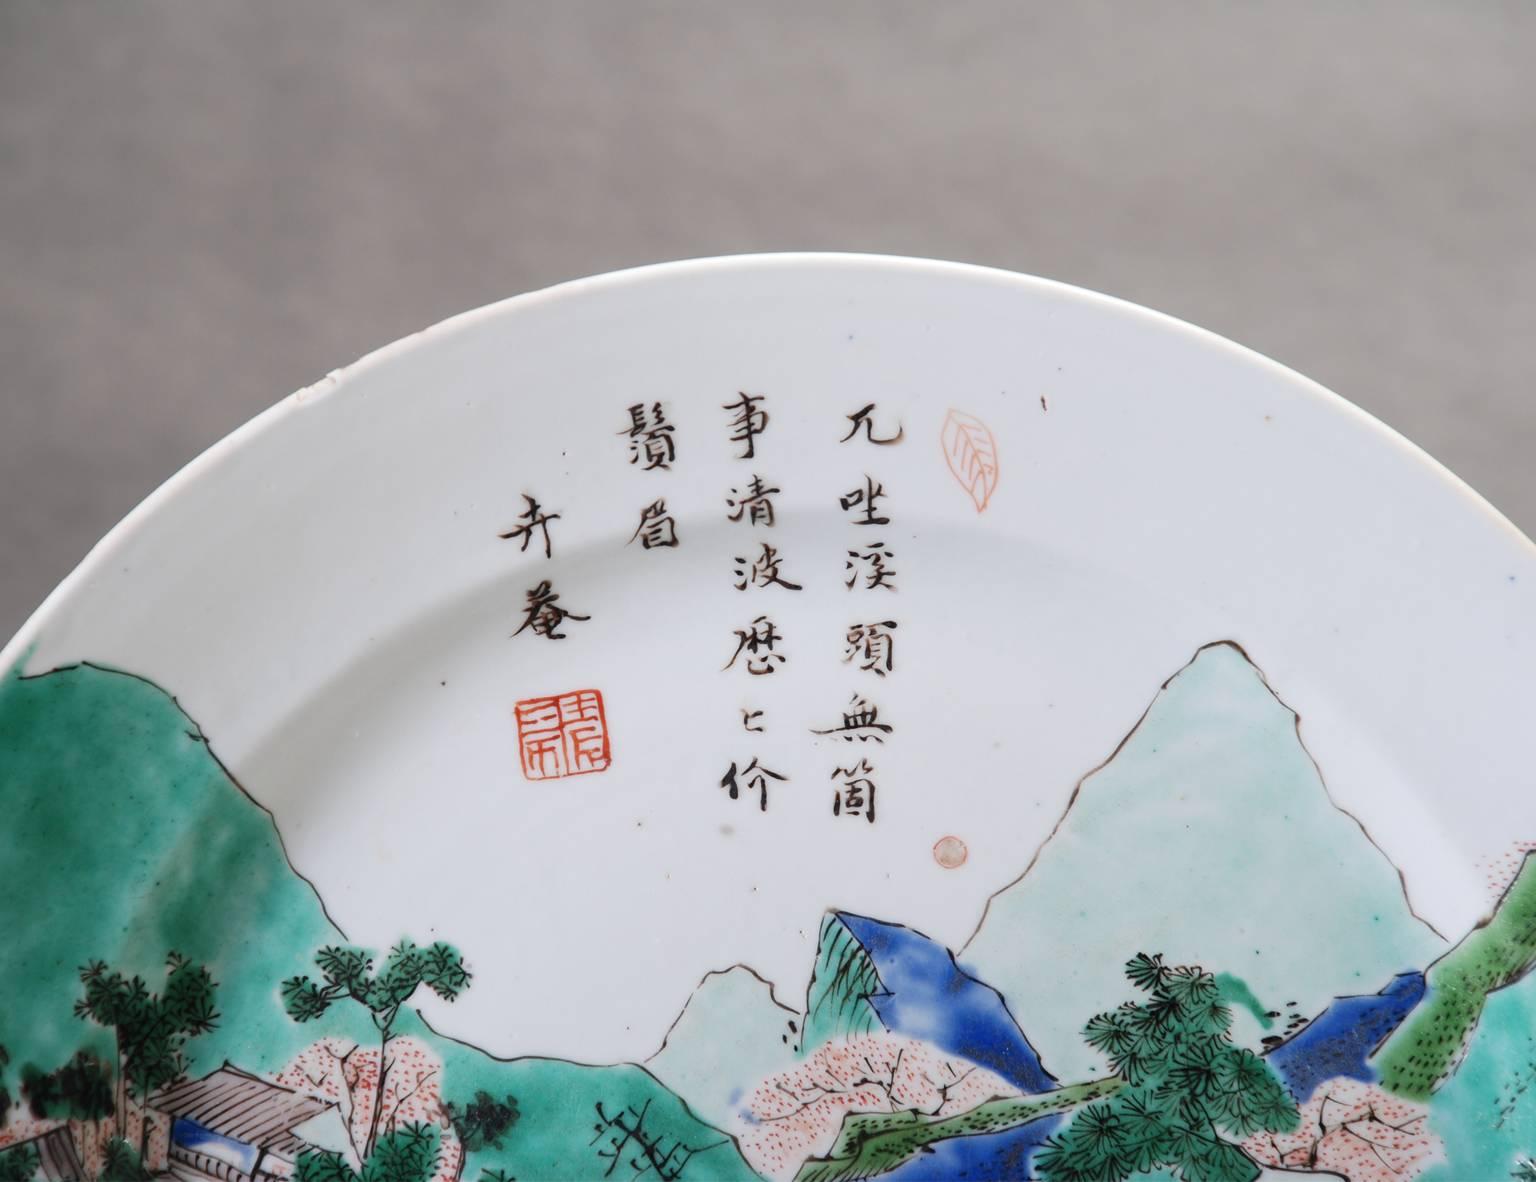 This plate has a poem enameled on the front of the dish which is unusual.